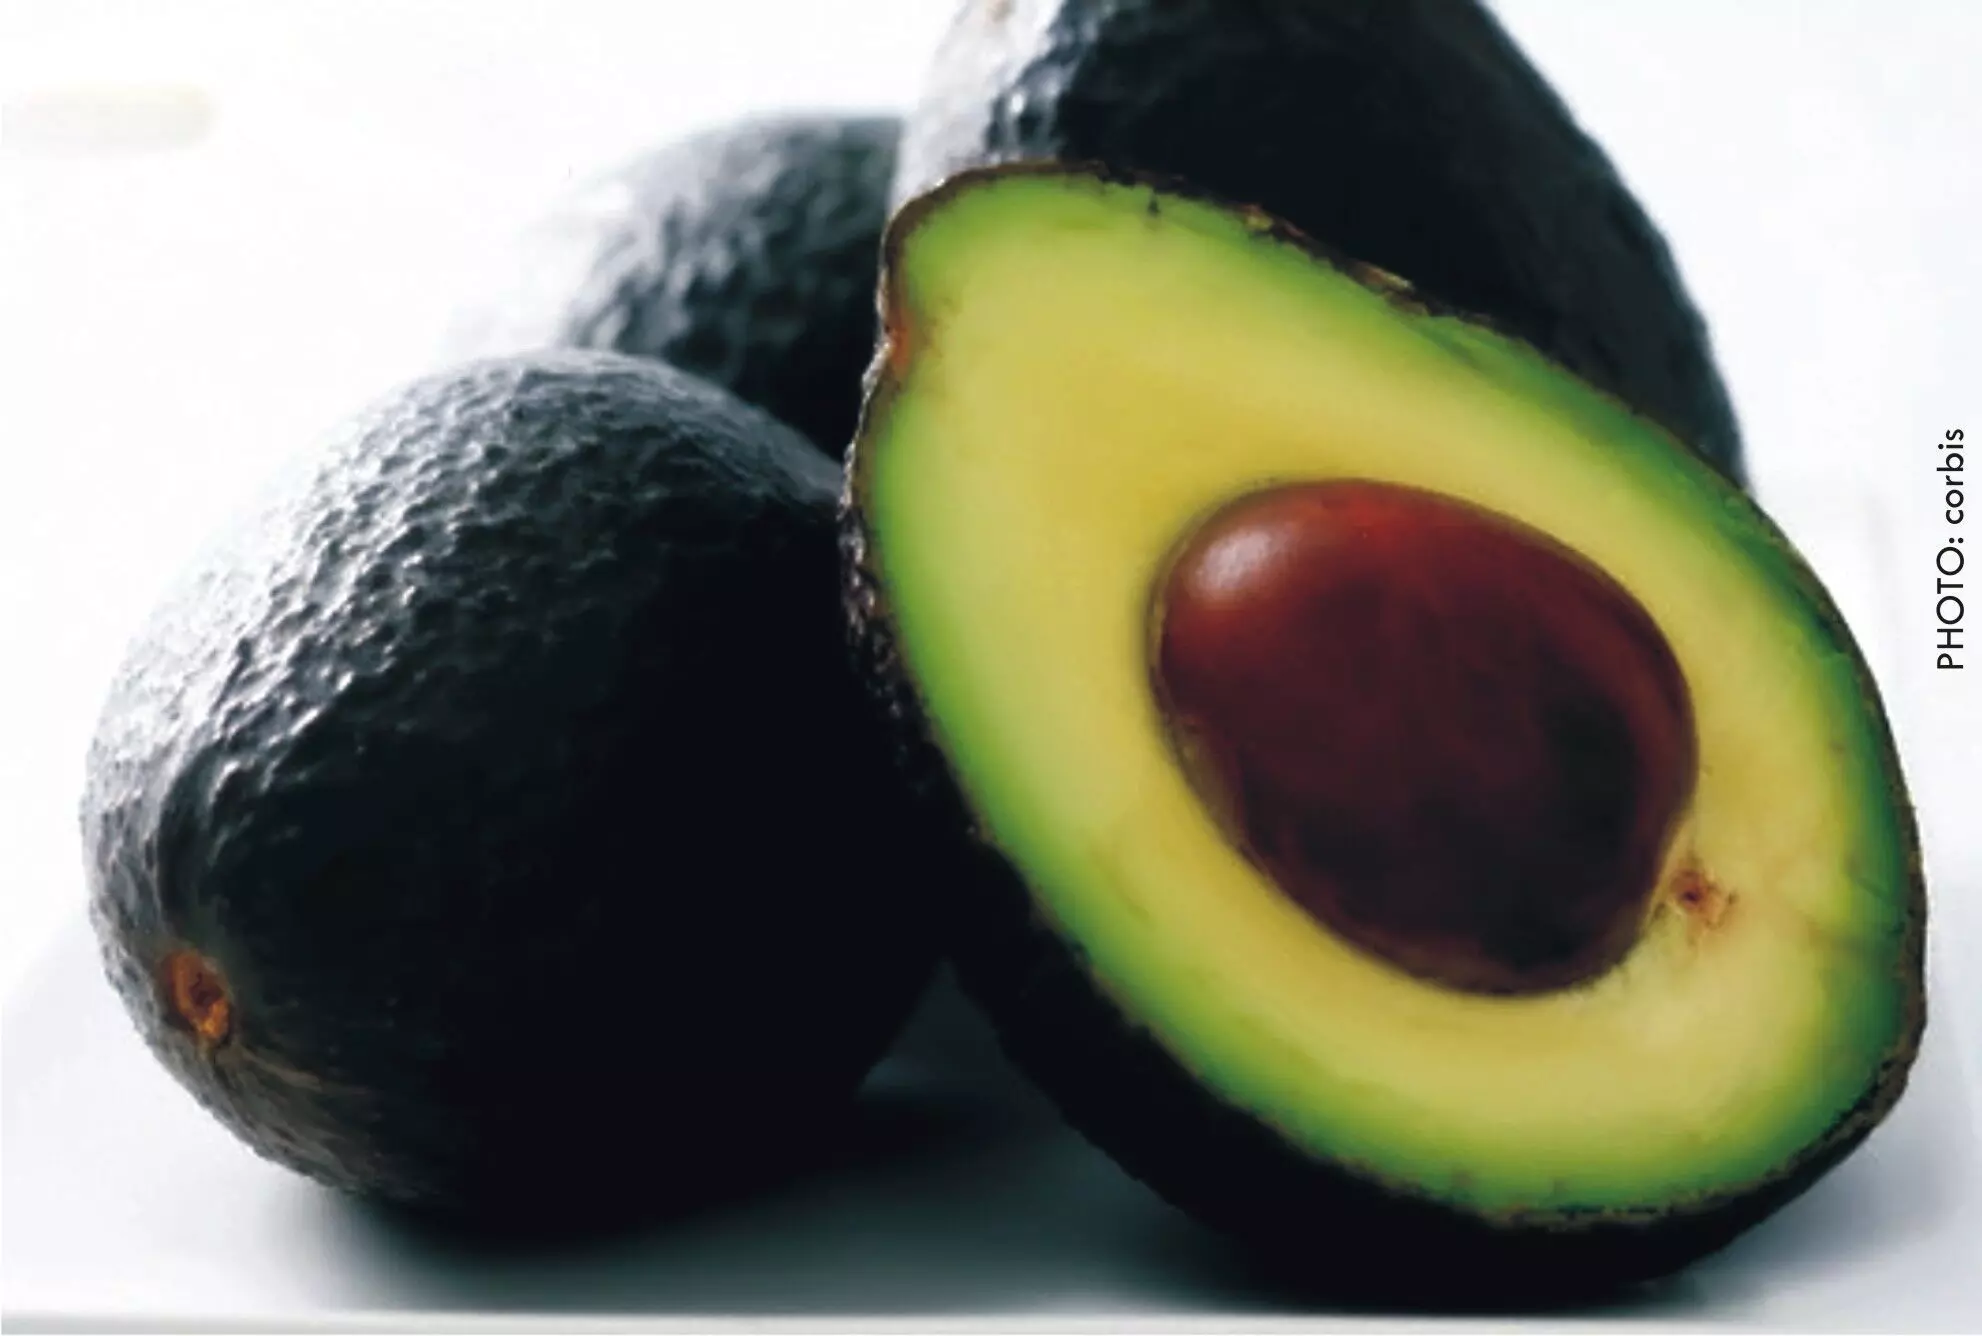 AVOCADOS: HEALTH BENEFITS, RISKS & NUTRITIONAL FACTS